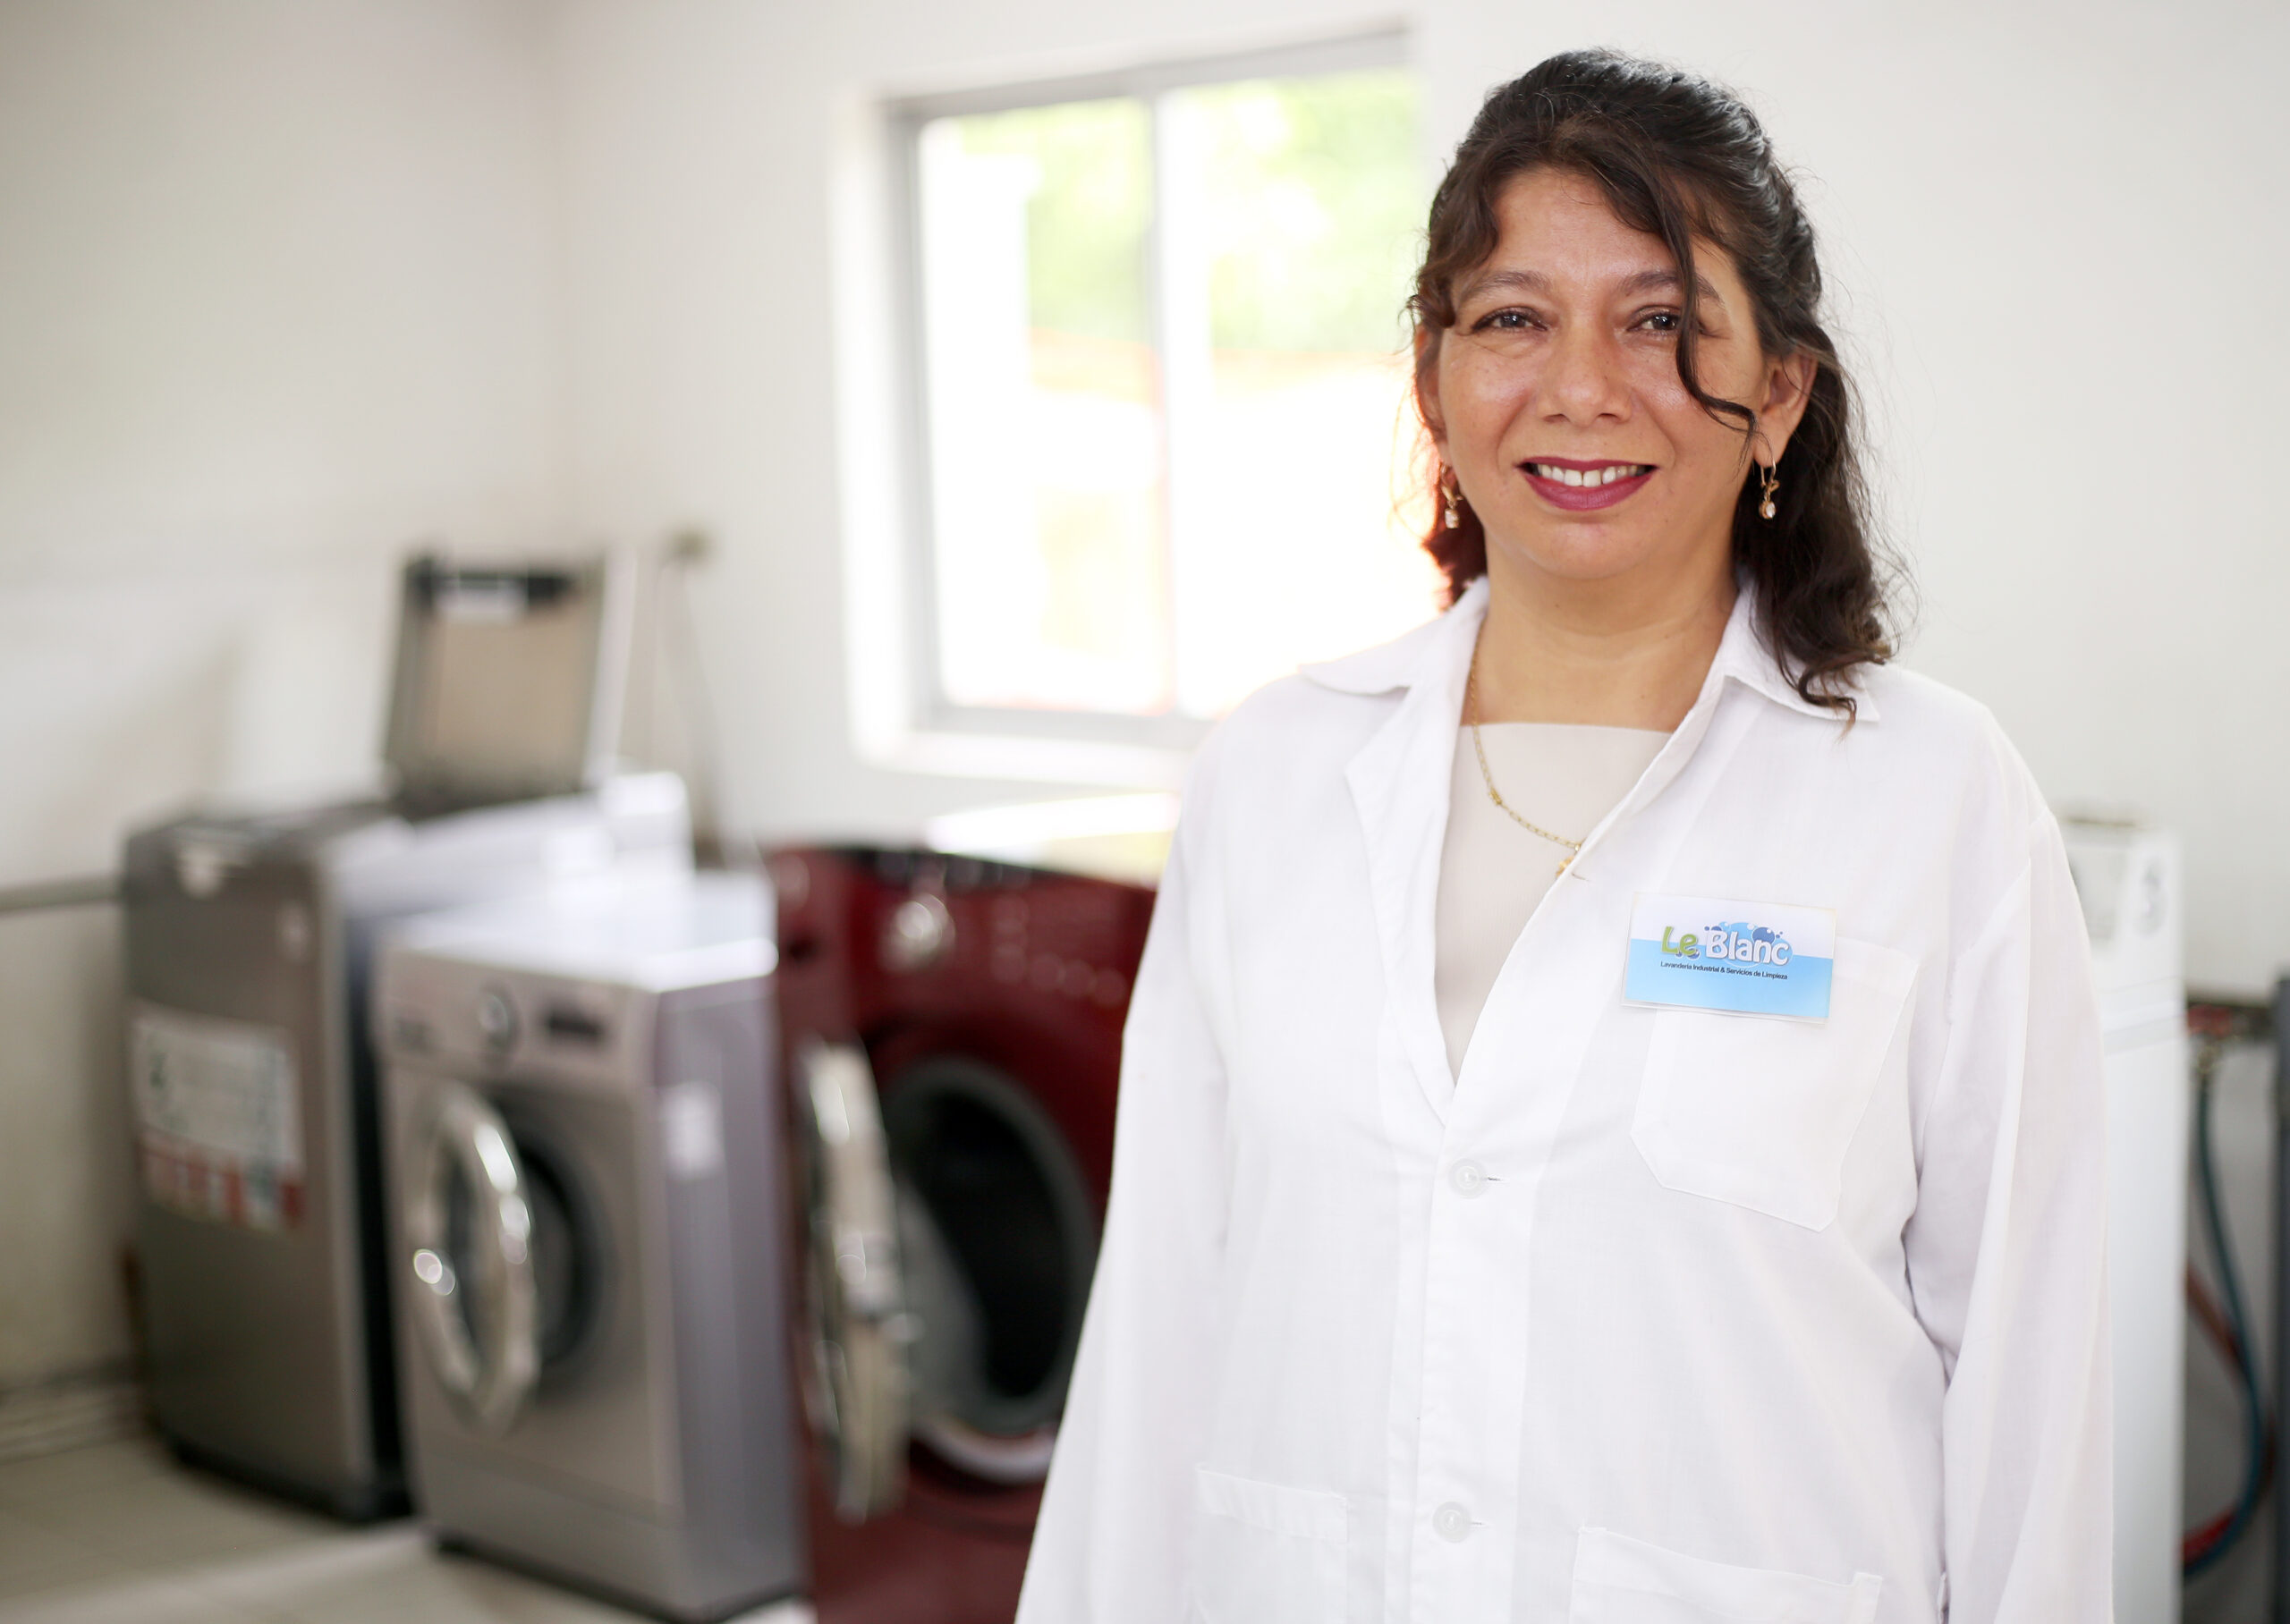 A woman stands on the right, wearing a white jacket, and smiling at the camera. There are several washing machines in the background. She is Jessica Vargas, an entrepreneur who successfully expanded her laundry business thanks to training from TechnoServe. 